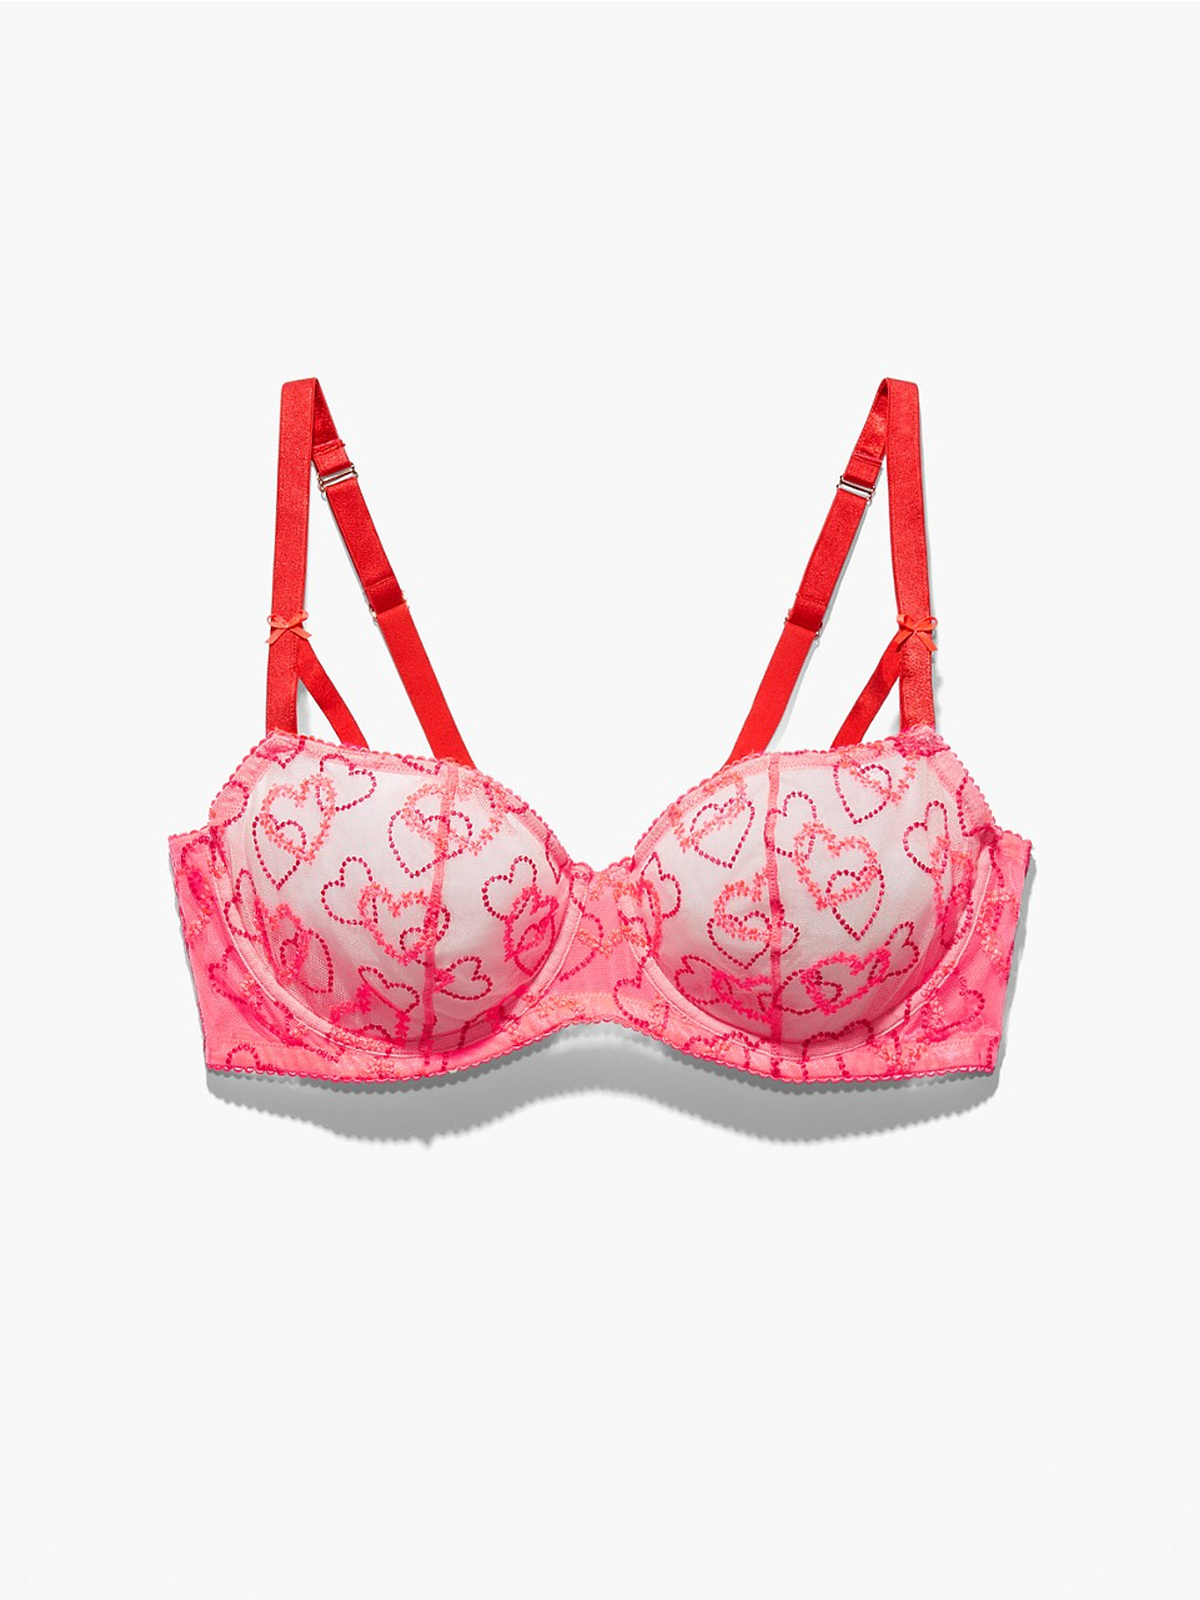 Savage X Fenty Candy Hearts Unlined Lace Balconette Bra